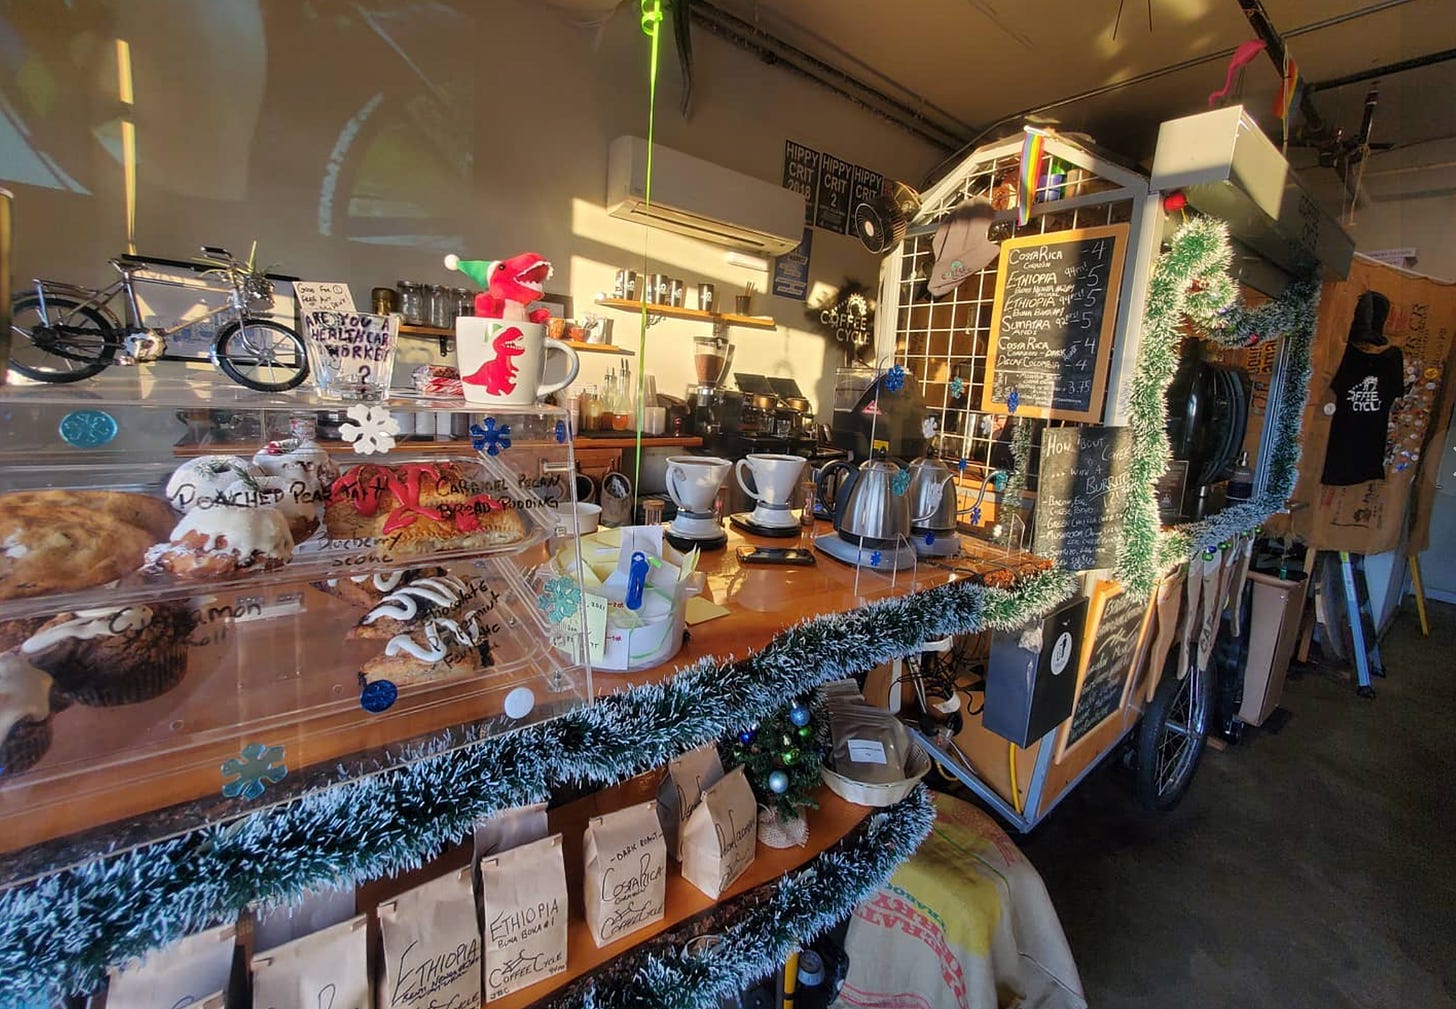 A long shot from left to right of the coffee bar at Coffee Cycle cafe in Pacific Beach San Diego. Wood bar top with coffee kettles, a pastry card, a dinosaur christmas decoration and on a shelf below brown bags of coffee beans for sale with handwritten labels.